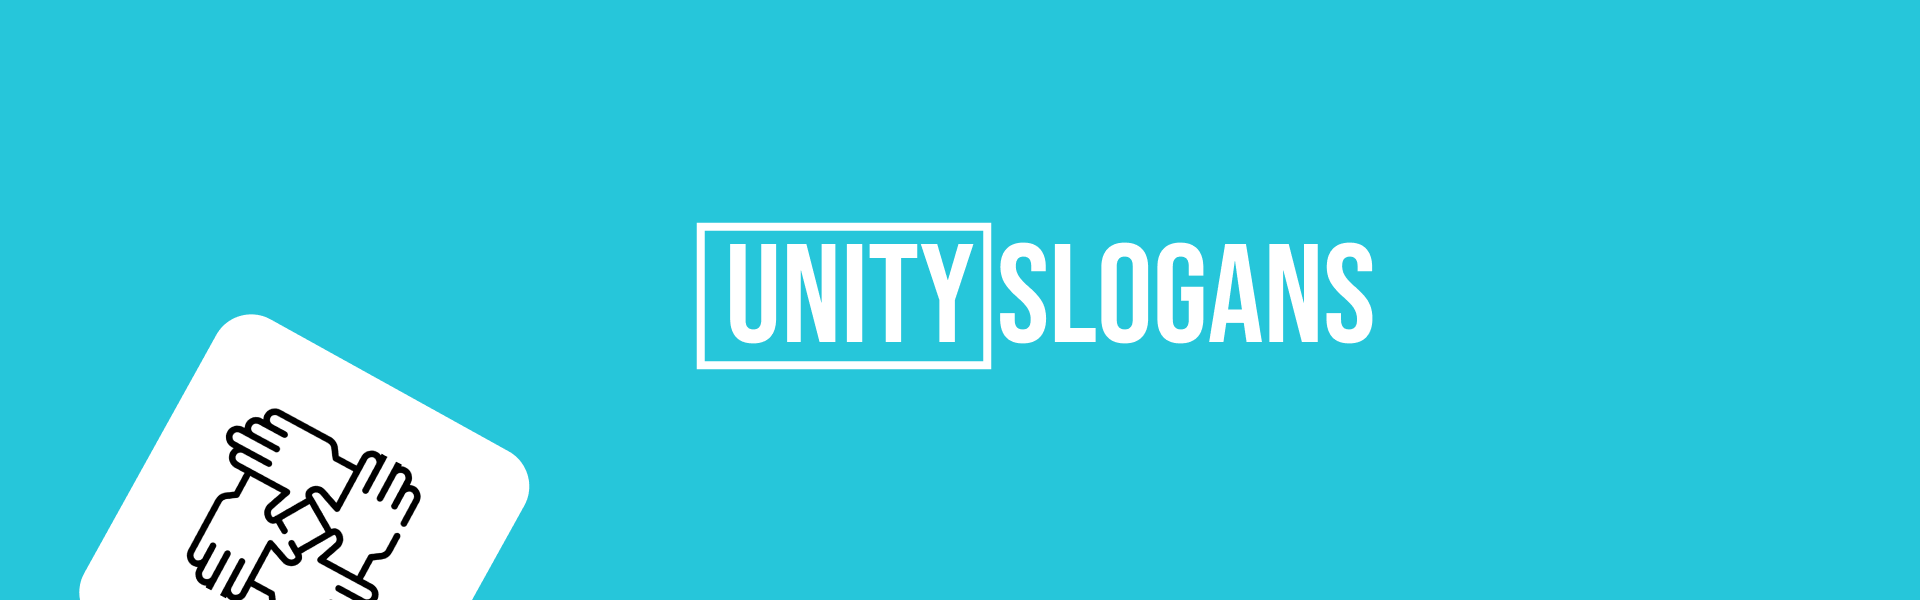 unity-slogans-featured